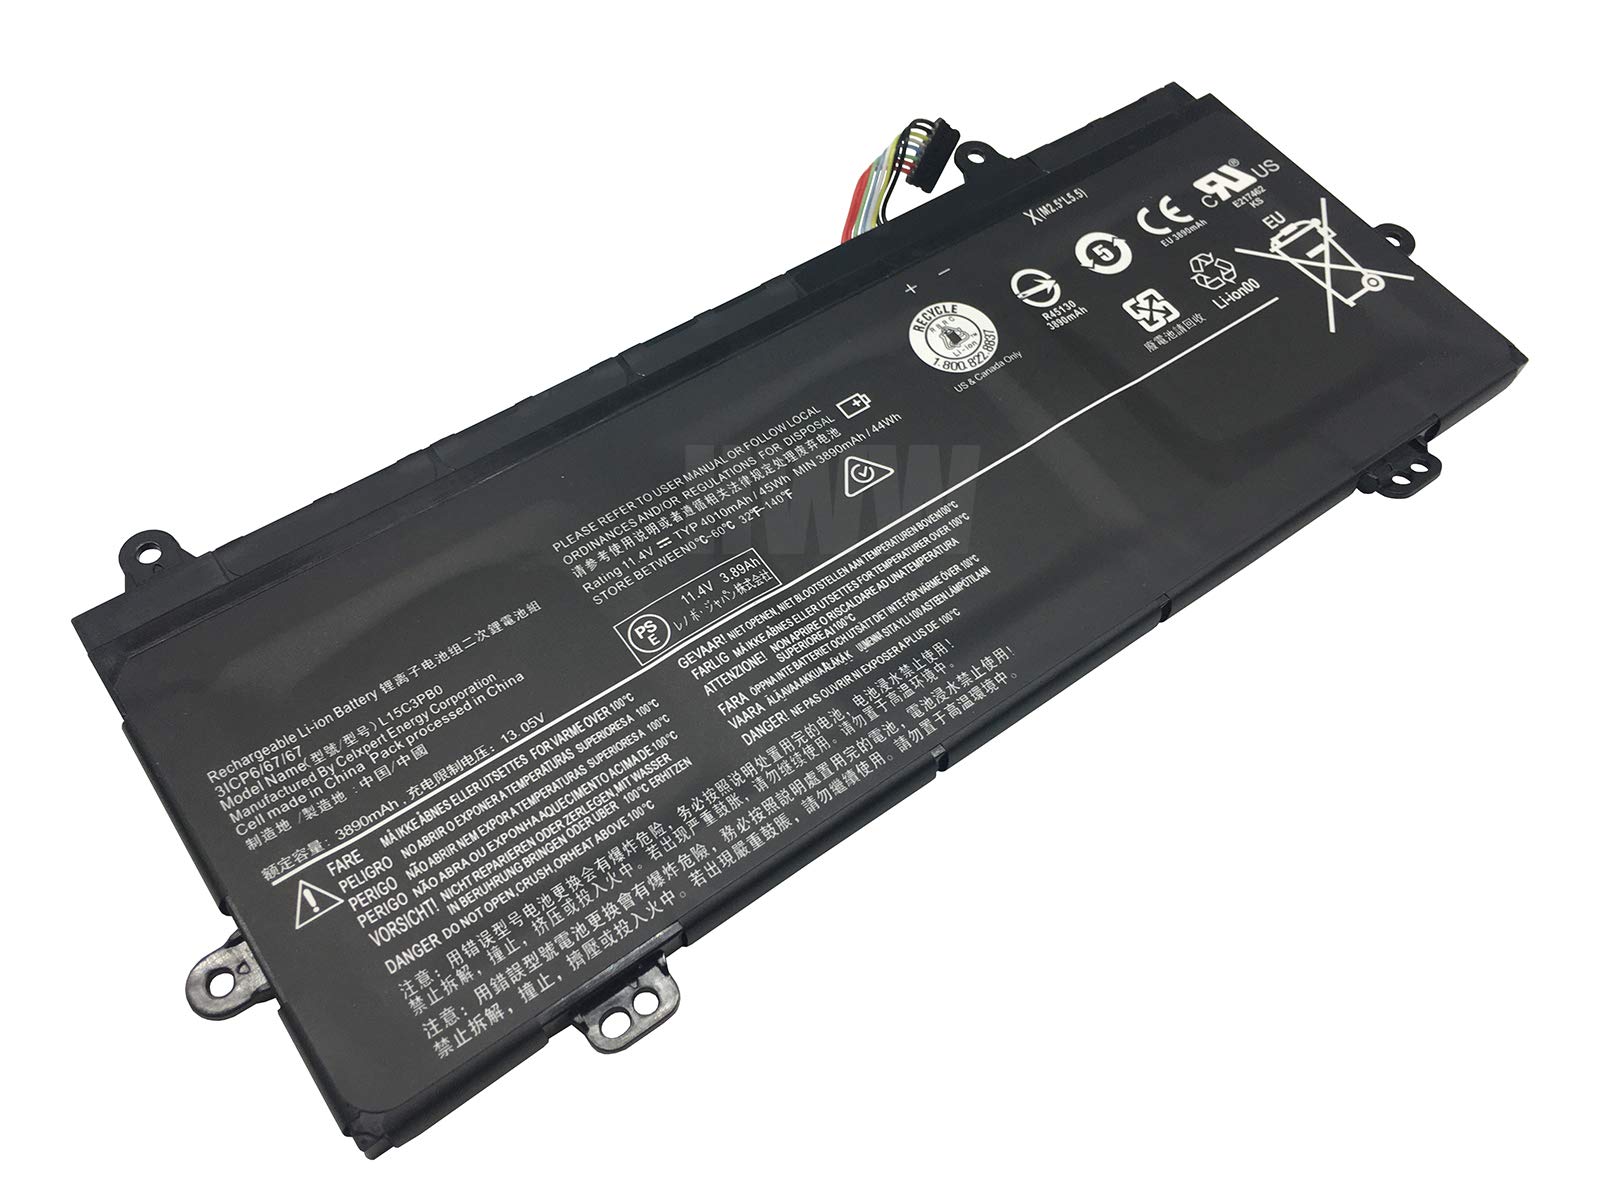 L15M3PB2 Lenovo Winbook N23 80UR002AAU, 300e N3450 81FY001LAU, N24 81AF000EAU Replacement Laptop Battery